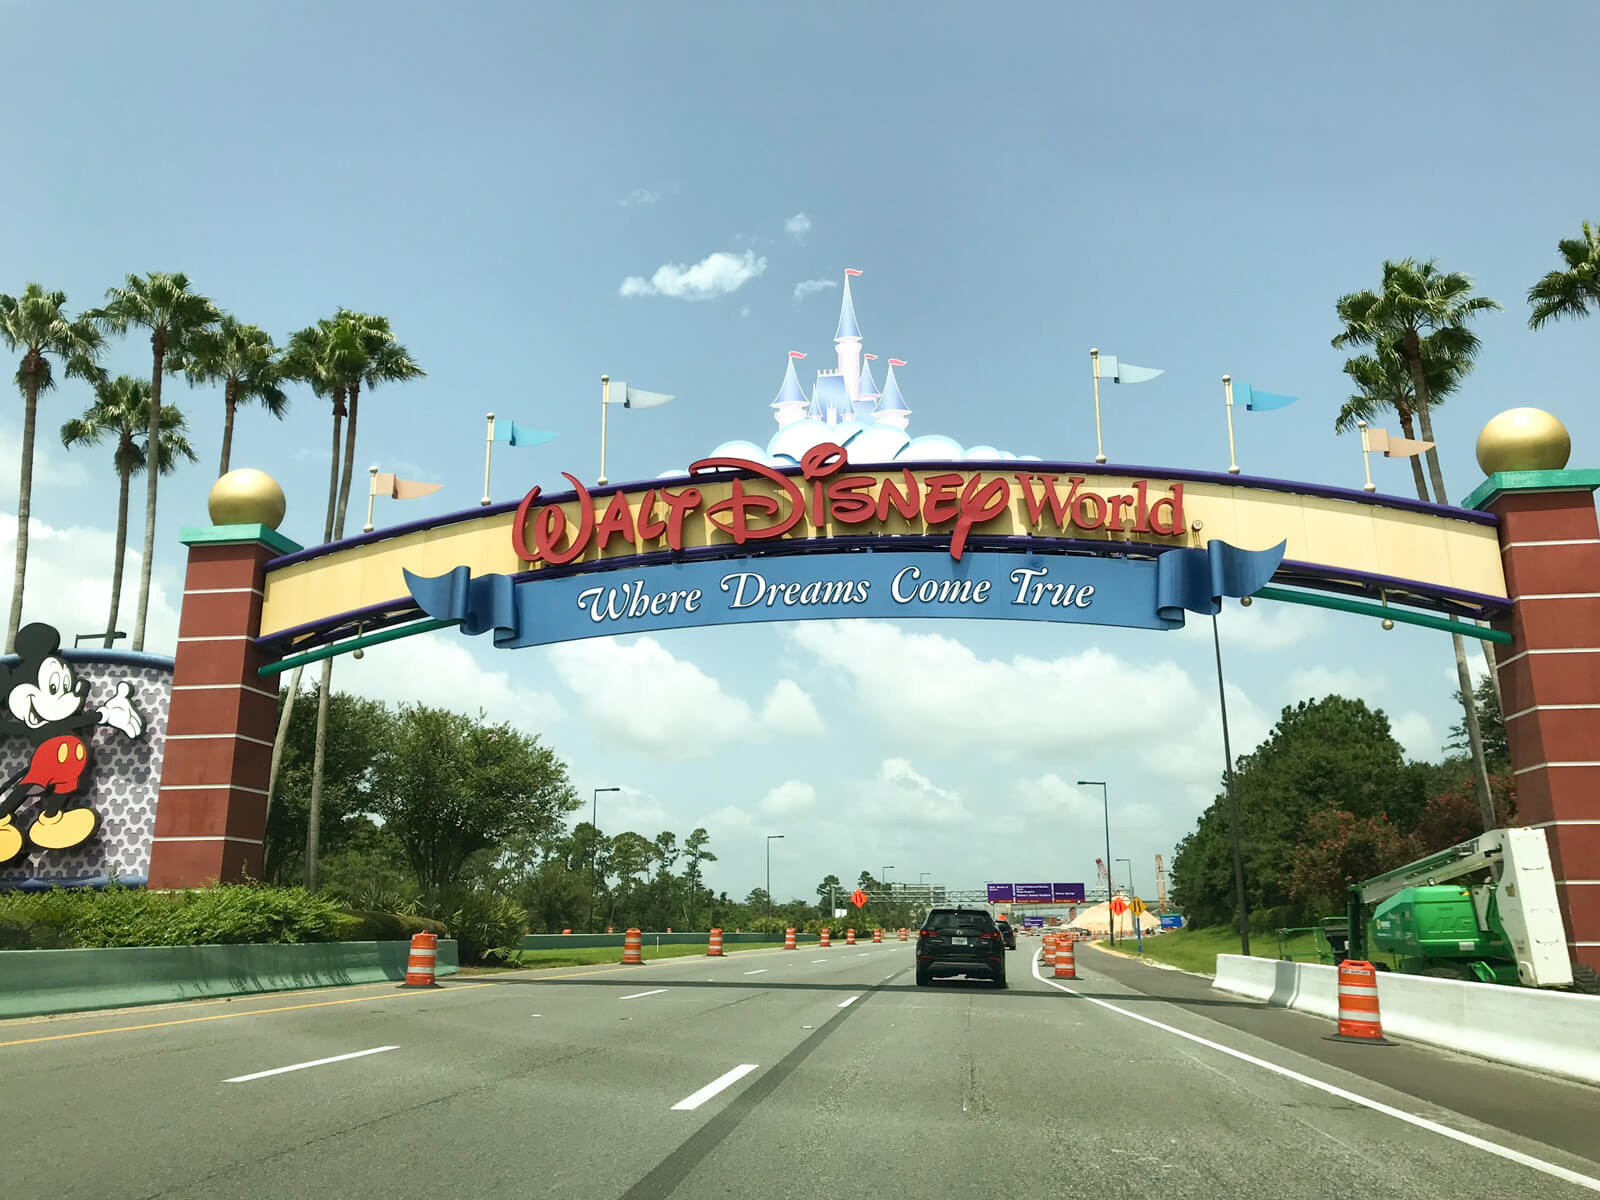 An arching sign with red text reading “Walt Disney World – Where Dreams Come True”. Several lanes of low traffic pass under the arch